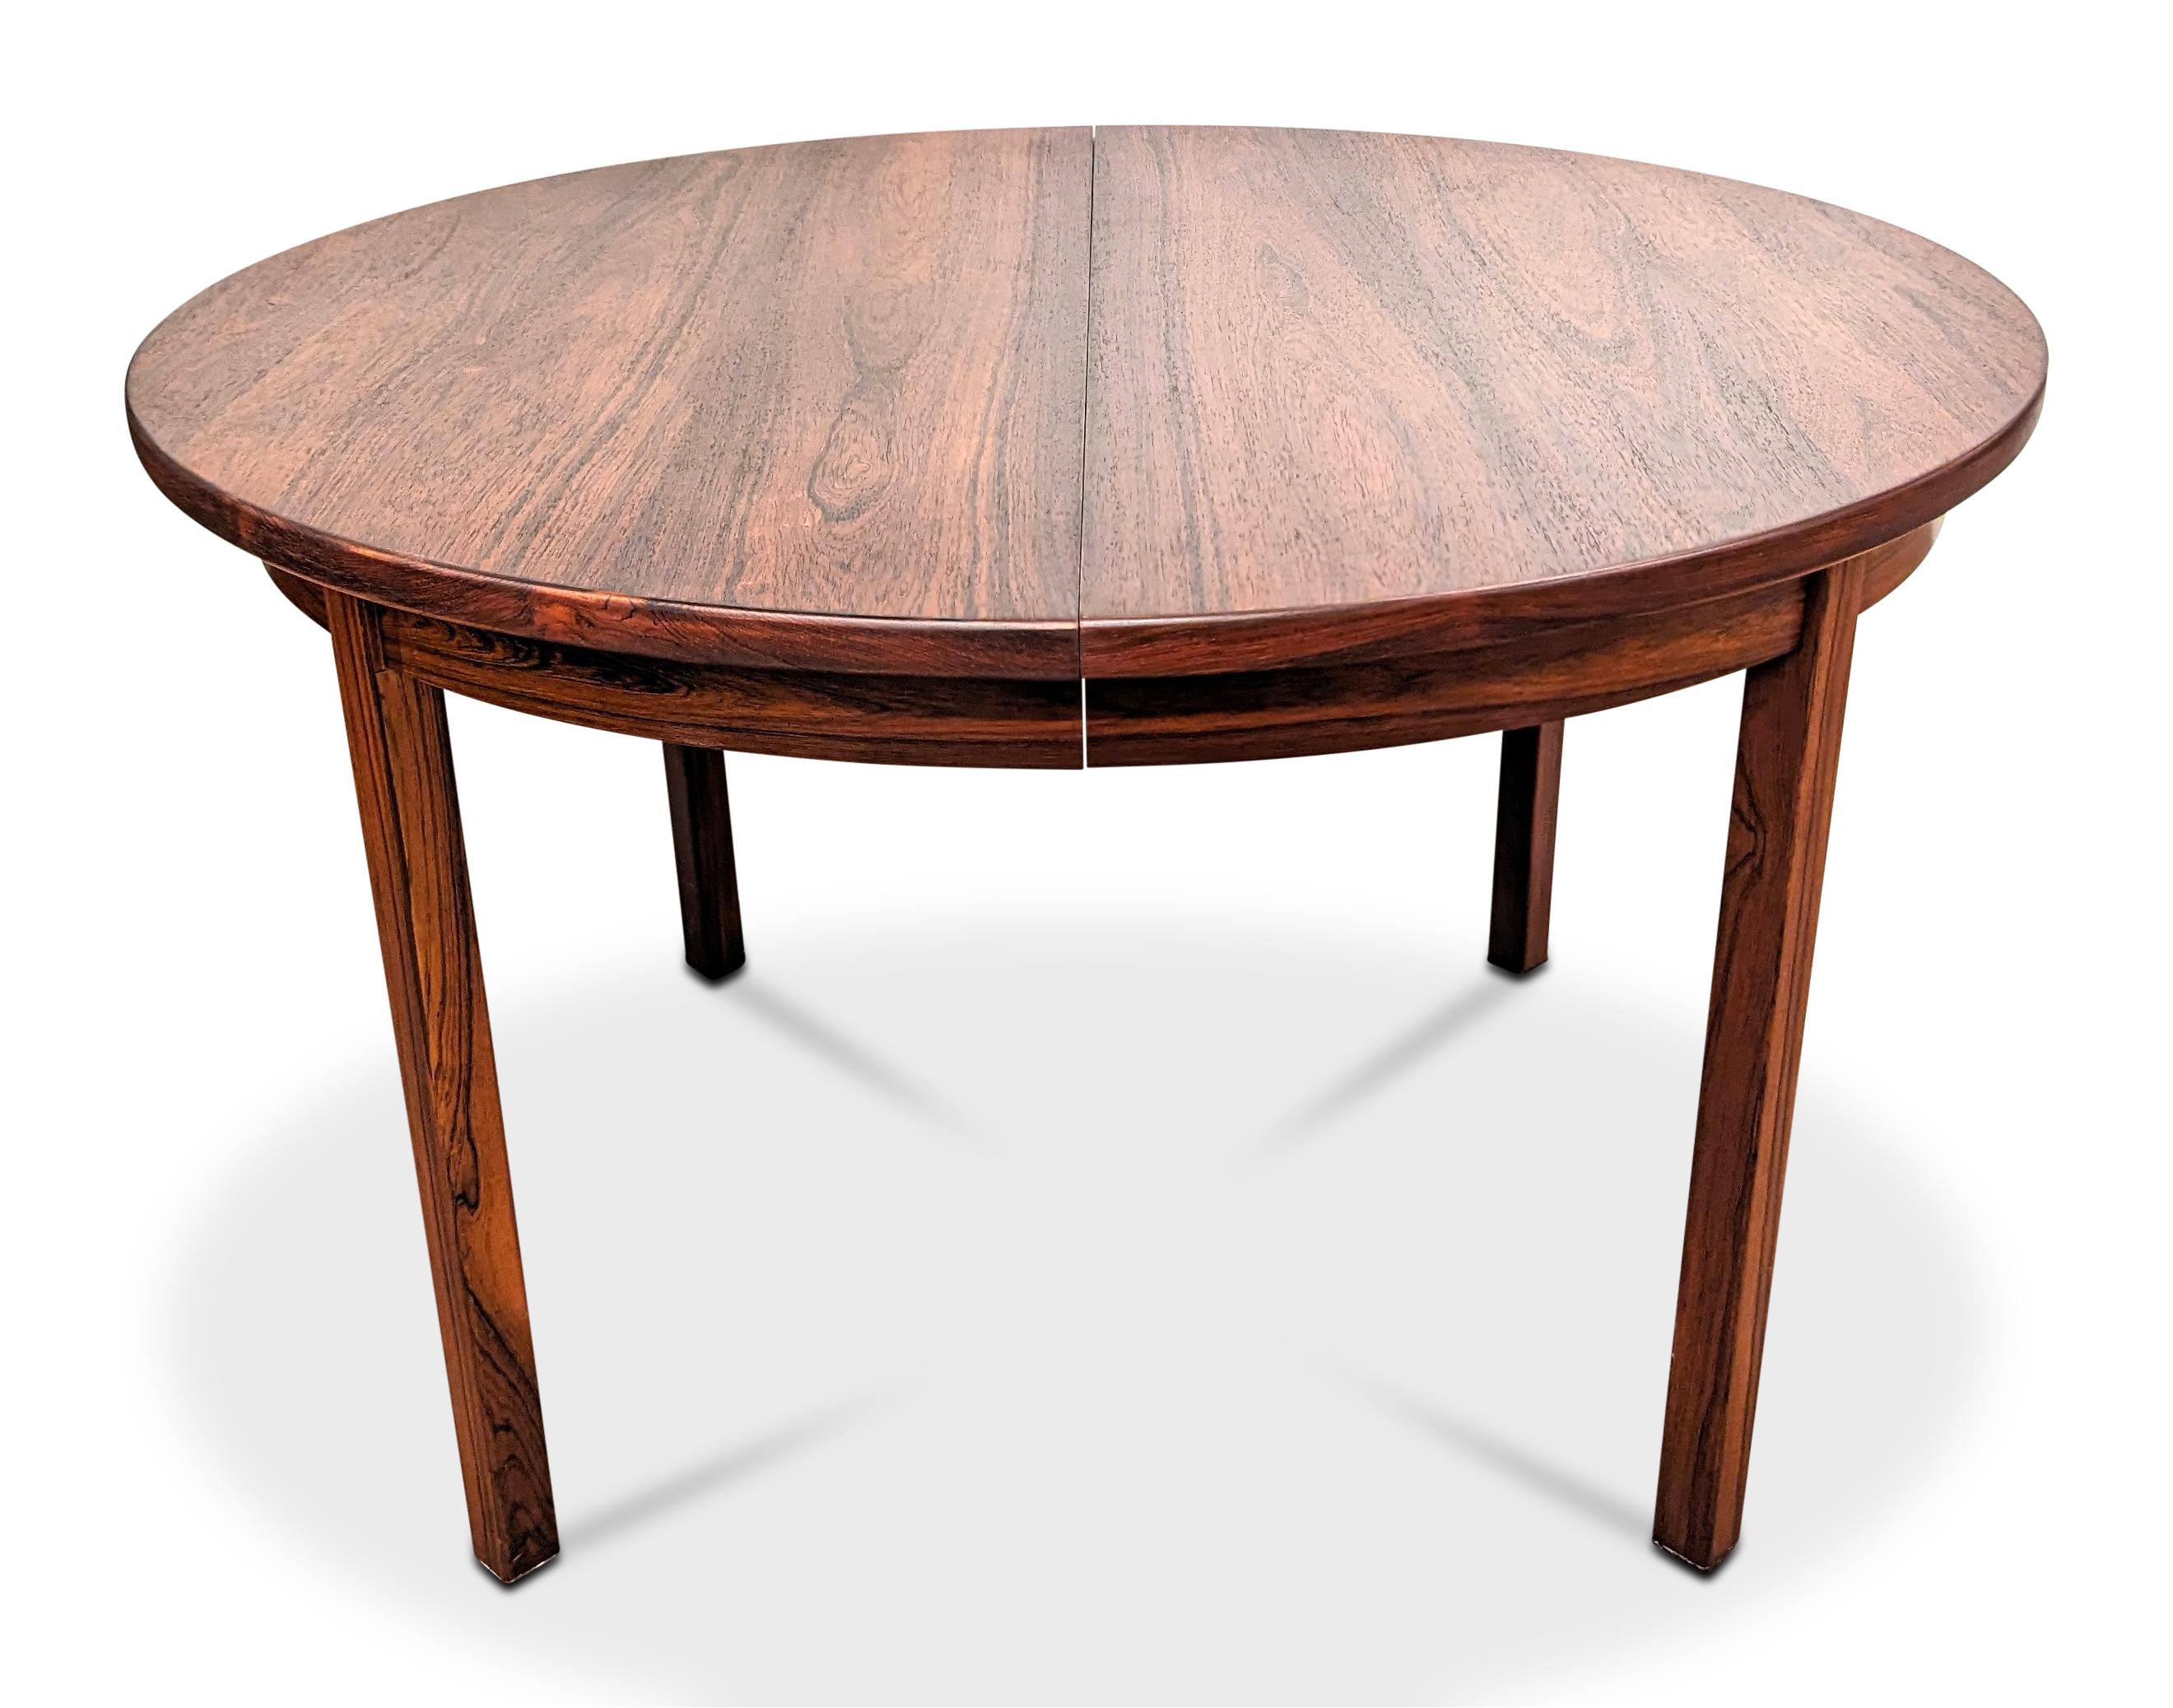 Mid-Century Modern Round Rosewood Table w 2 Butterfly Leaves - 022435 Vintage Danish Modern